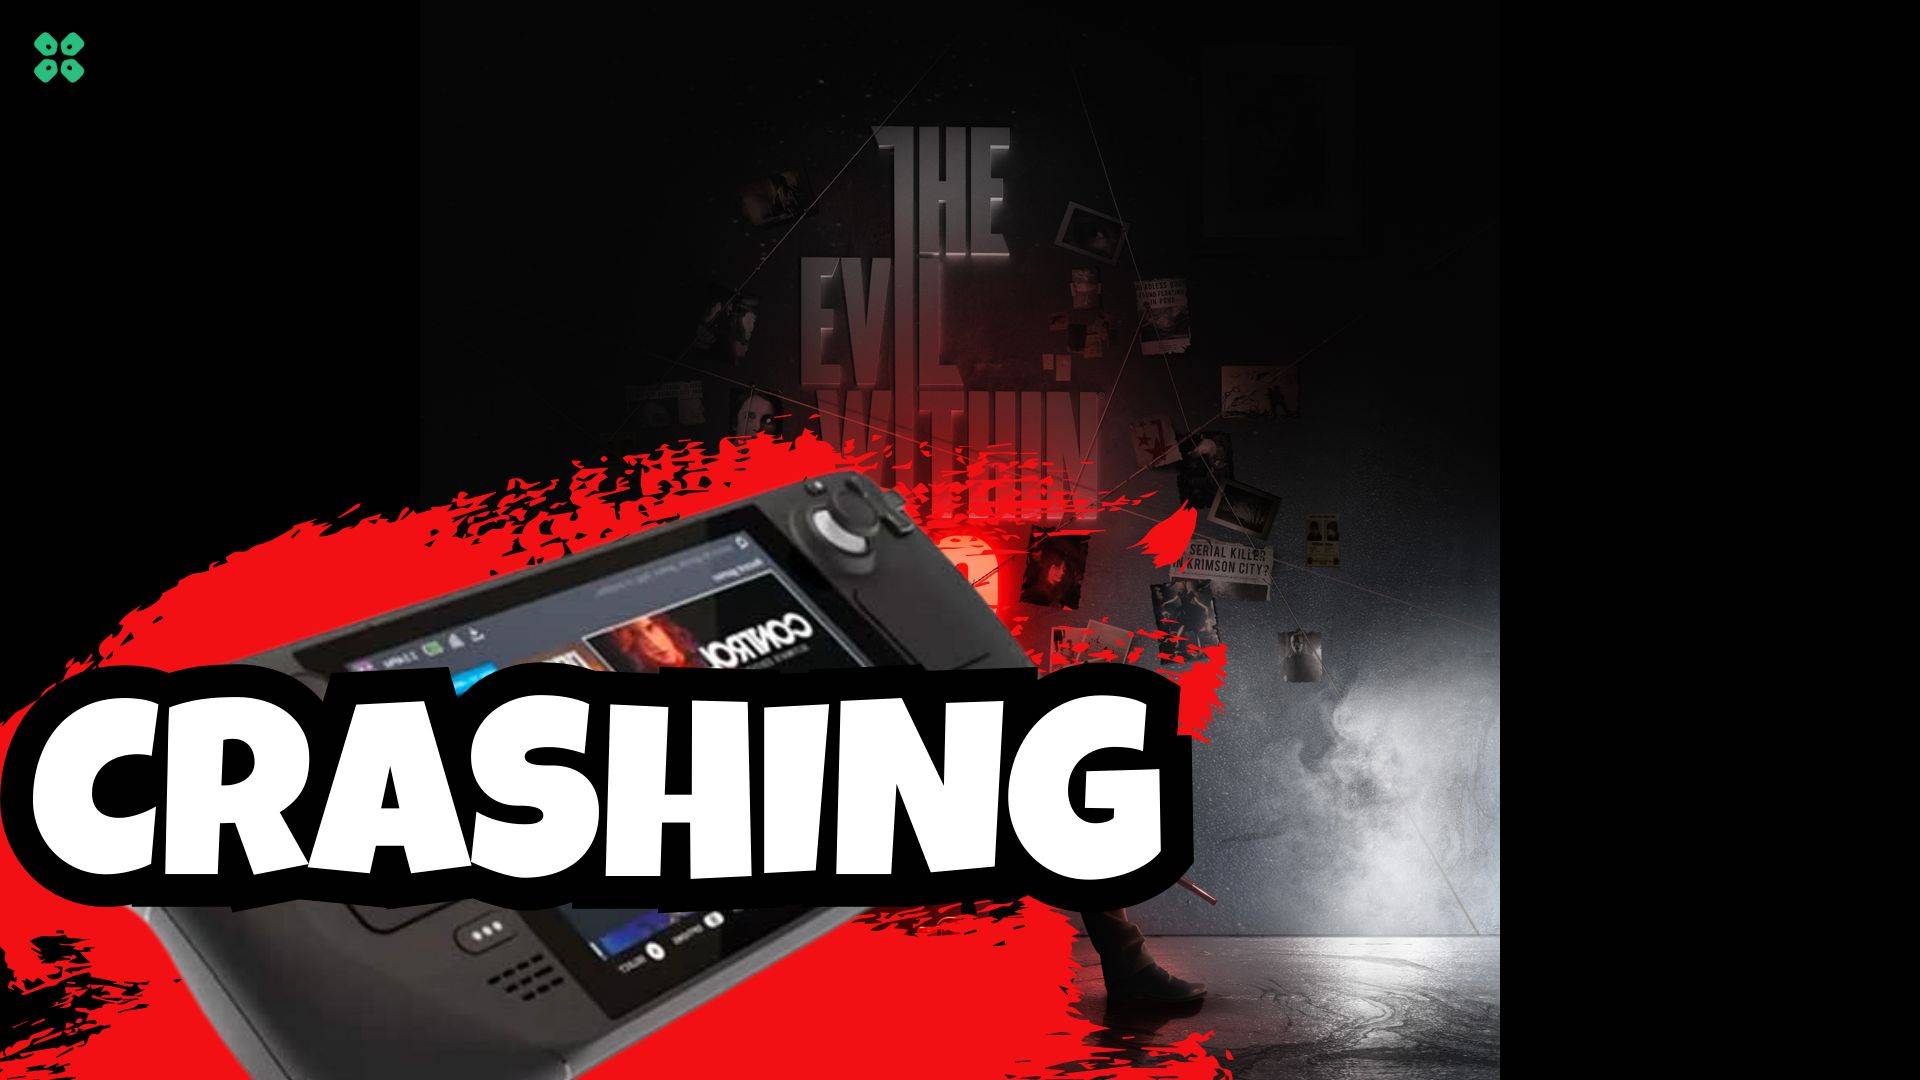 FIX: The Evil Within Crashing on Steam Deck